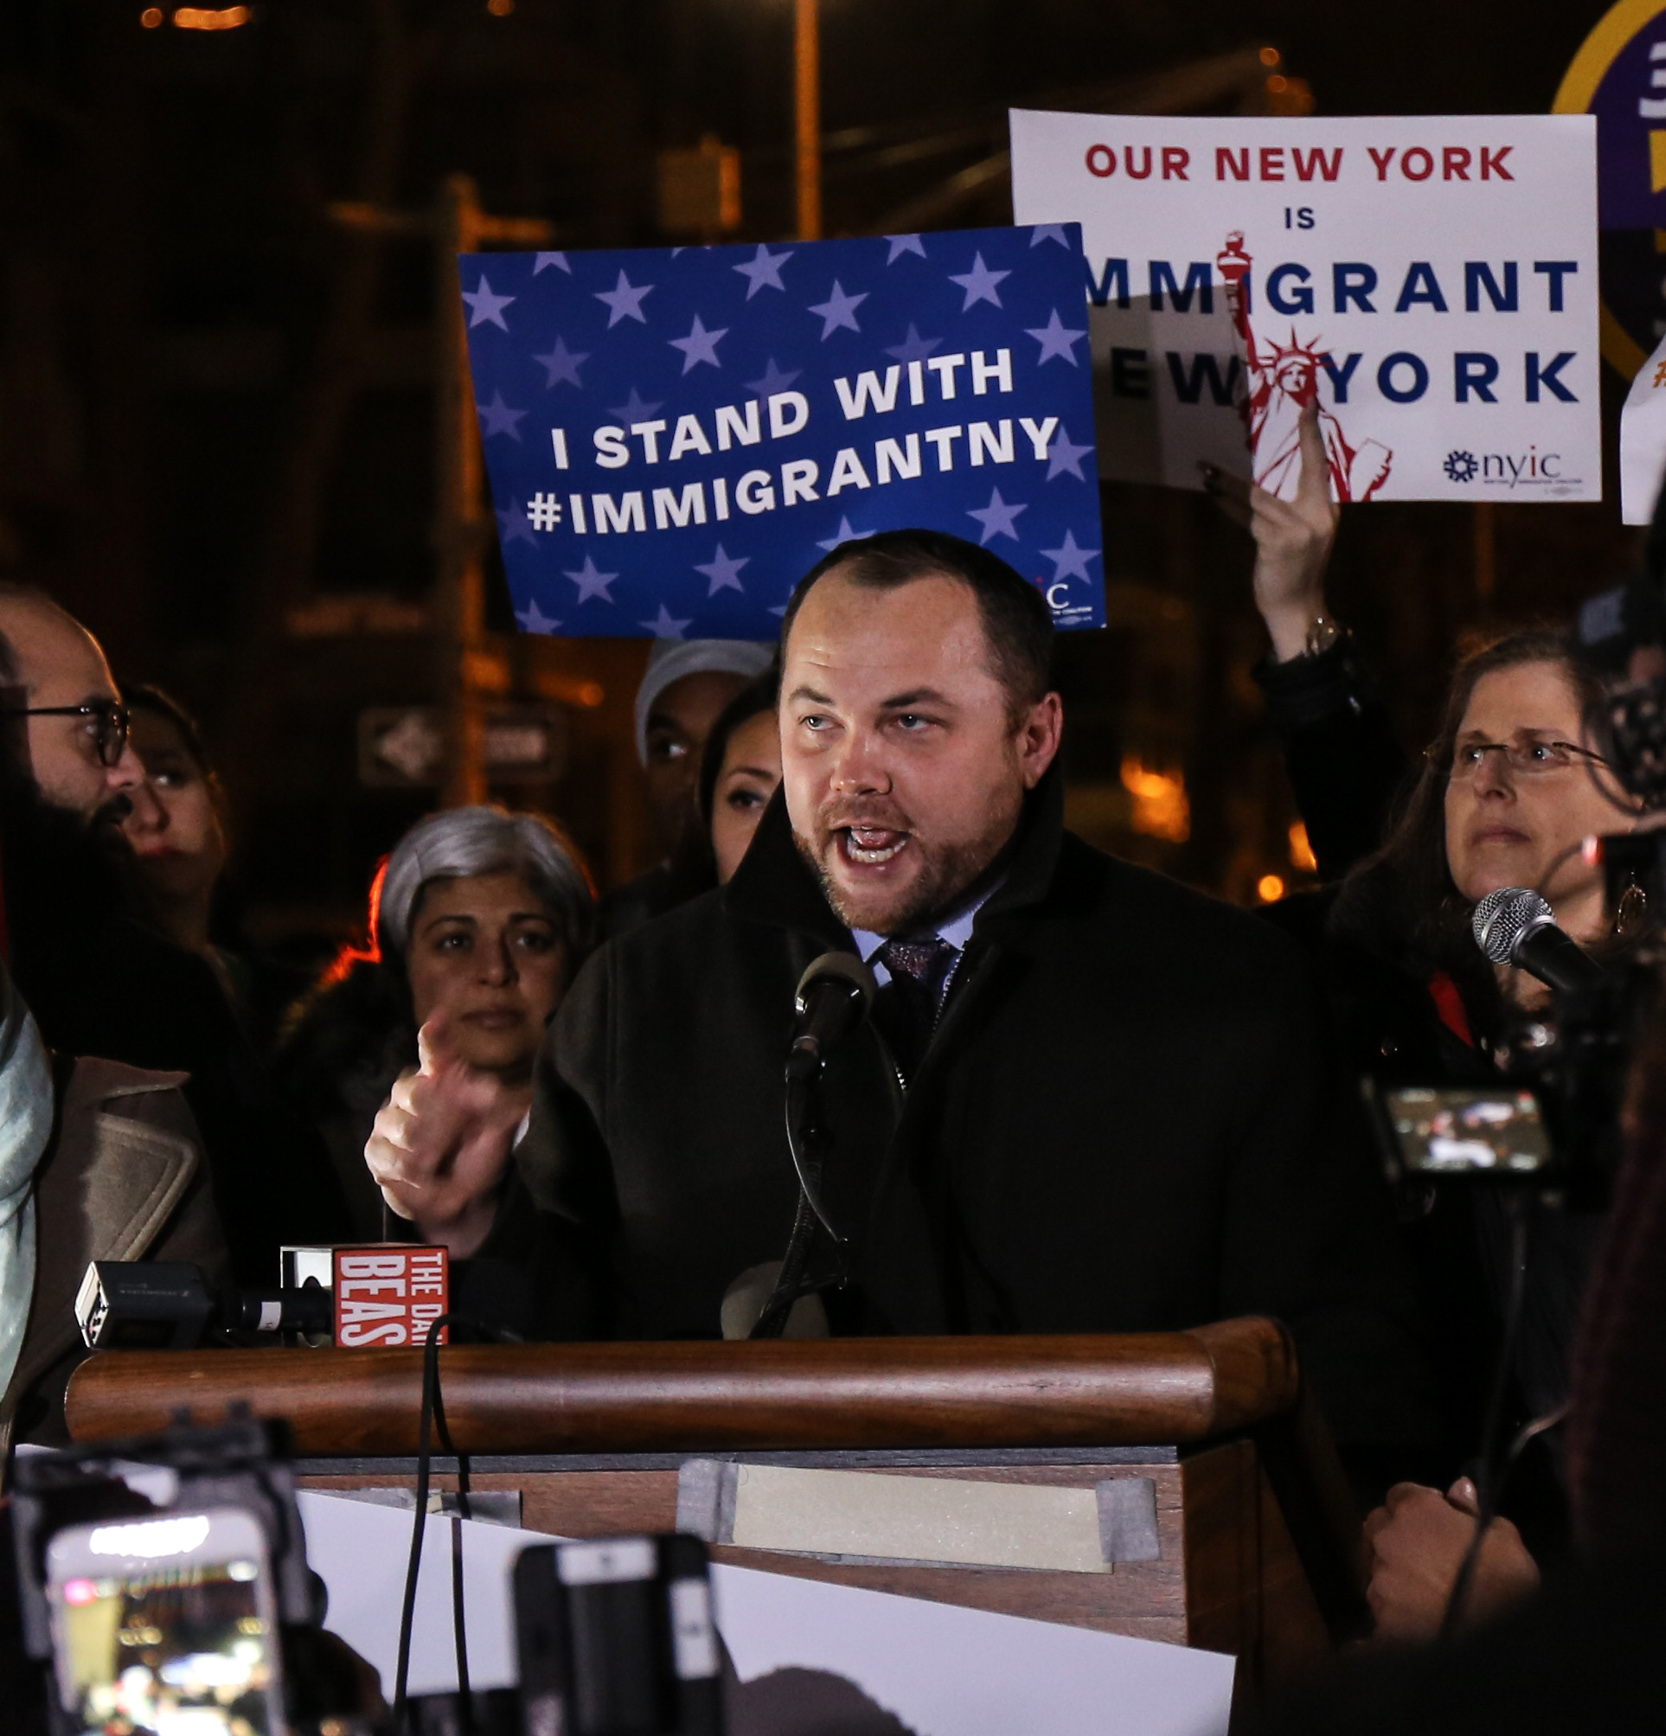 Councilmember Corey Johnson gave a fiery speech, saying that New York City "will be the face of the resistance."